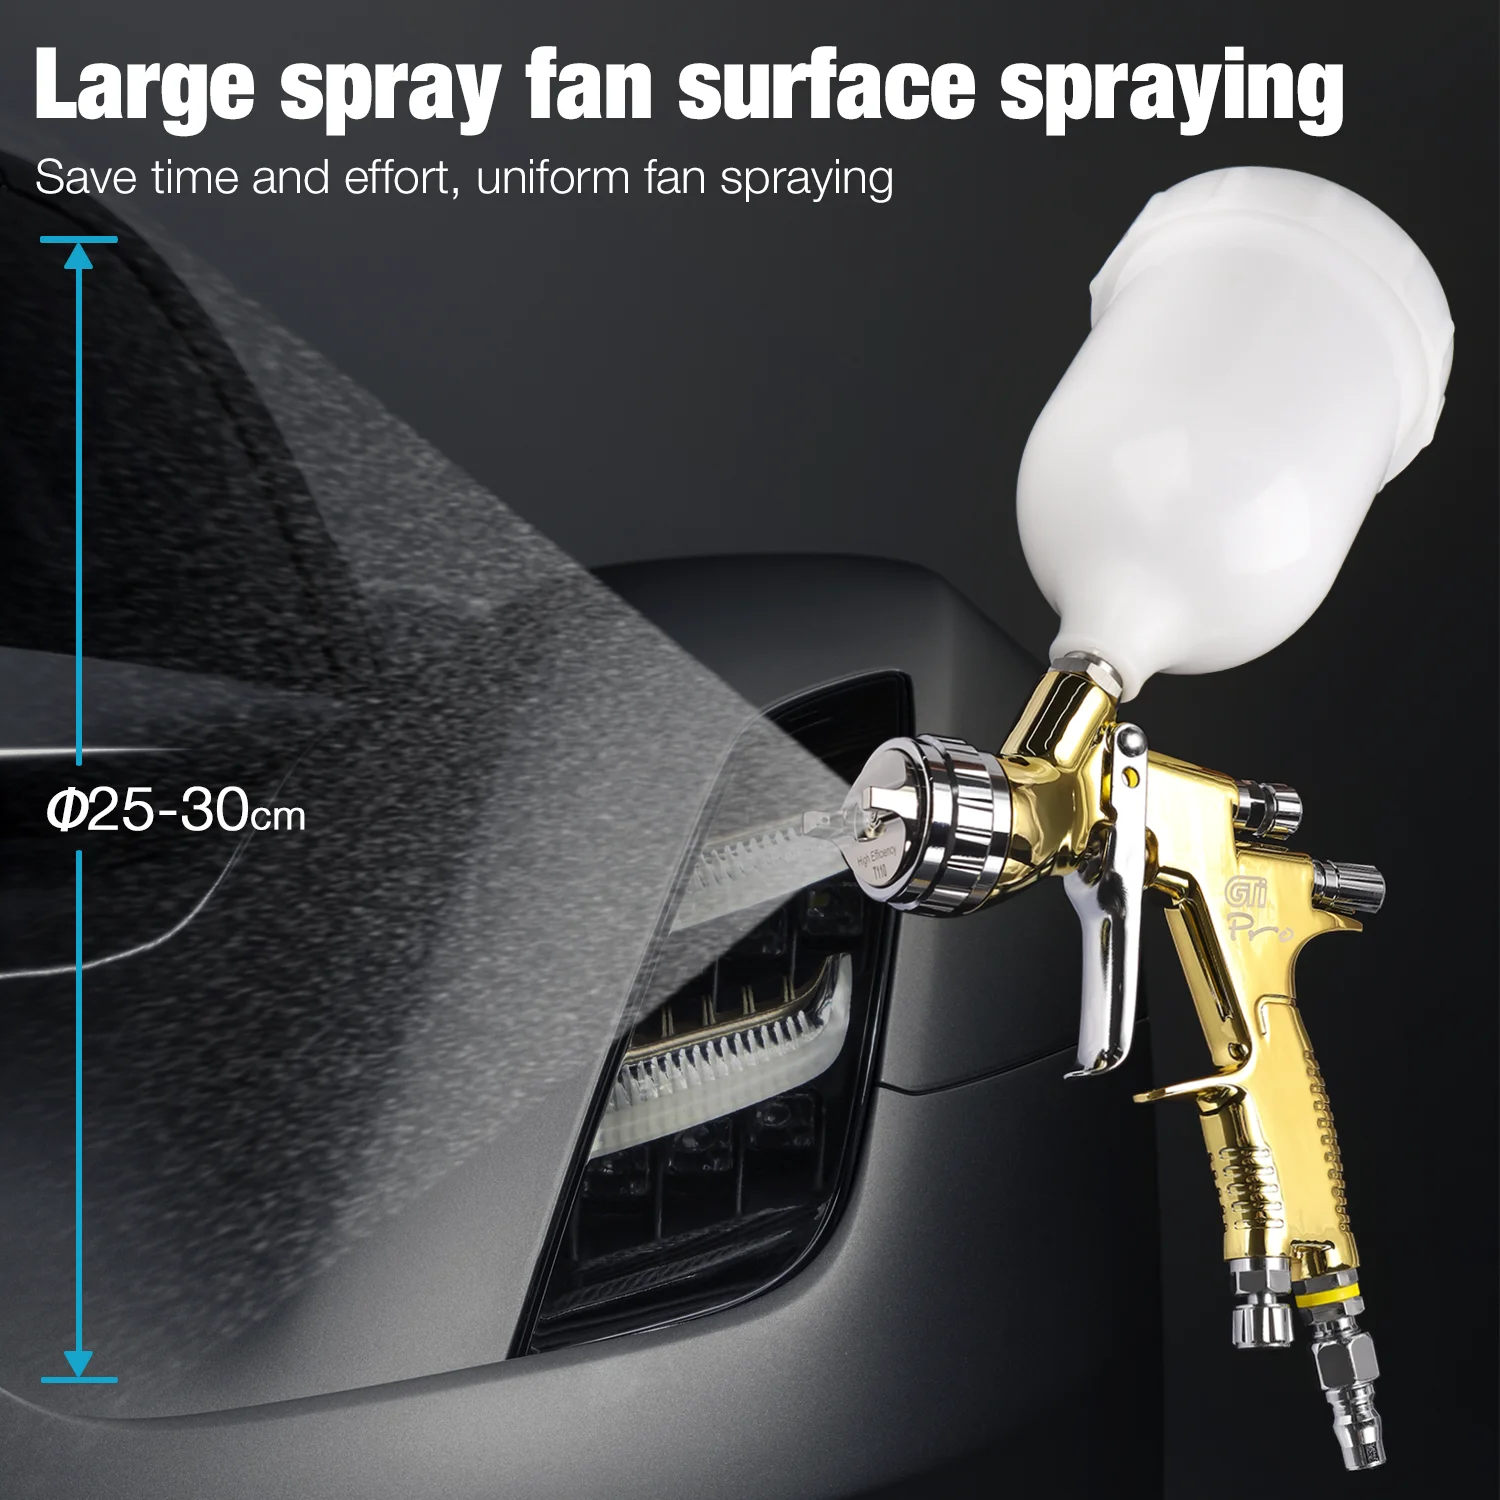 New High Quality Spray  GTI Pro 1.m Nozzle Painting  High Atomization Paint  Wat - £147.69 GBP